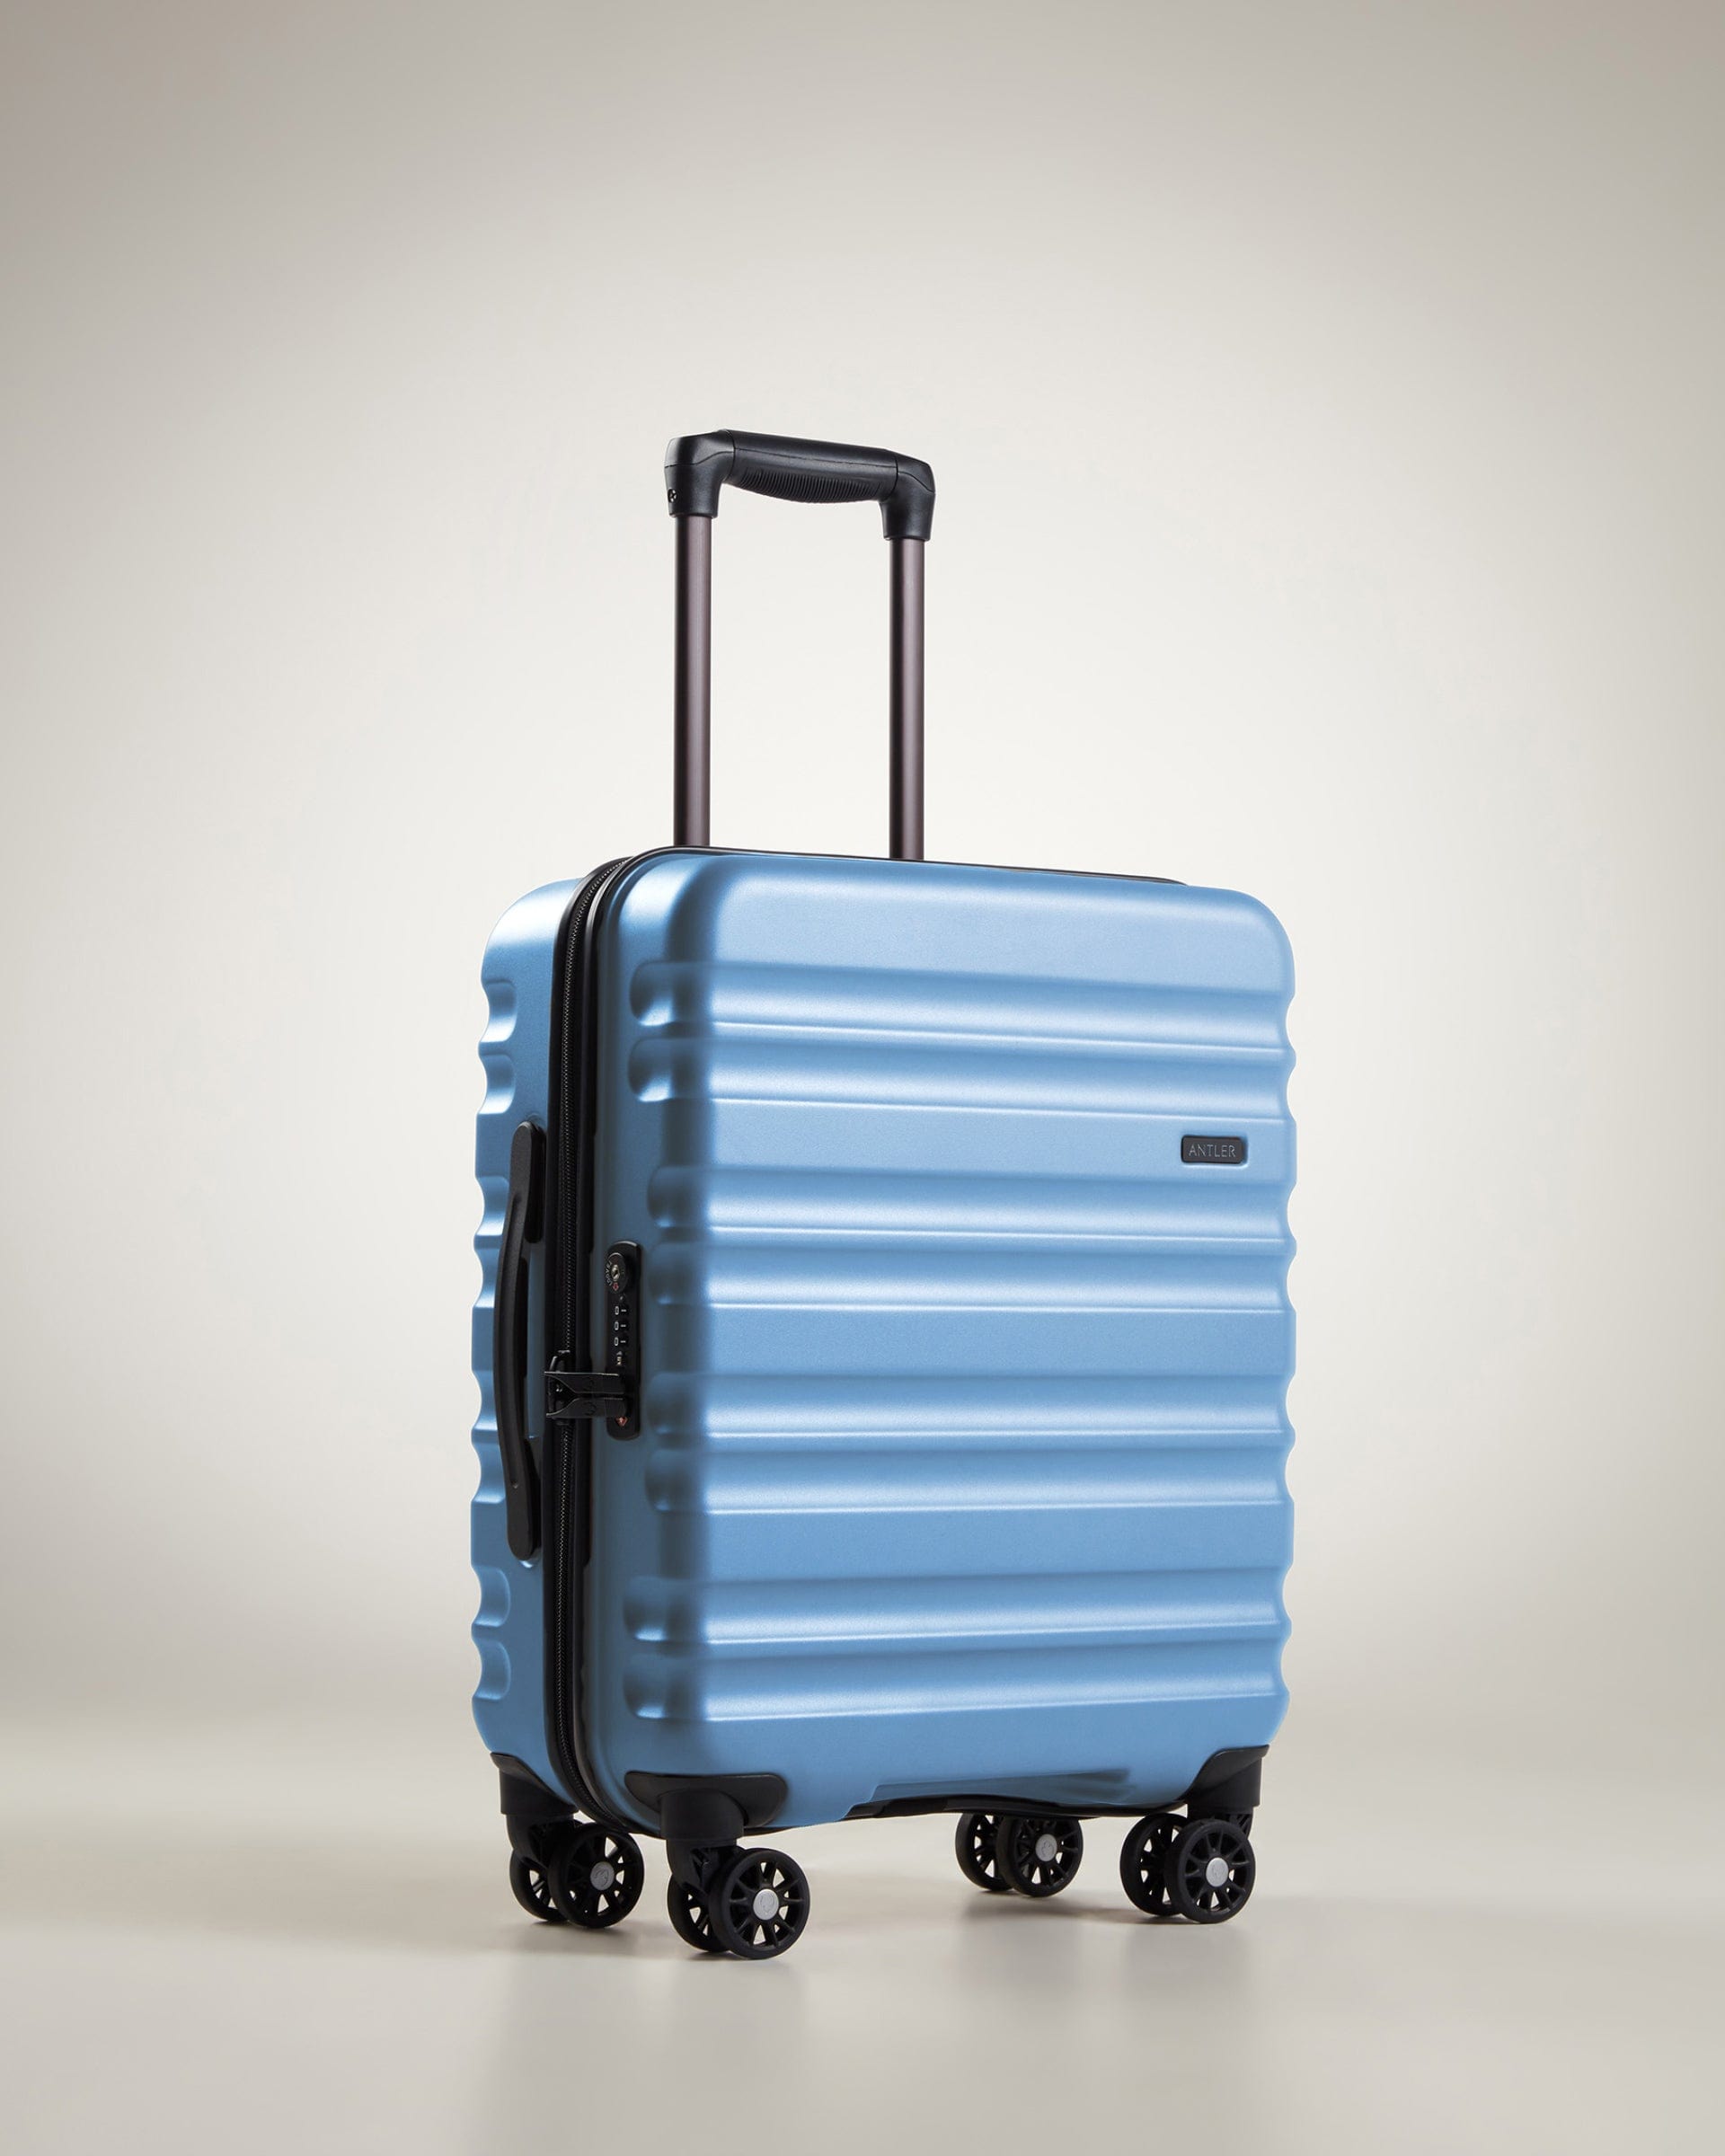 View Antler Clifton Cabin Suitcase In Azure Size 20 x 40 x 55 cm information